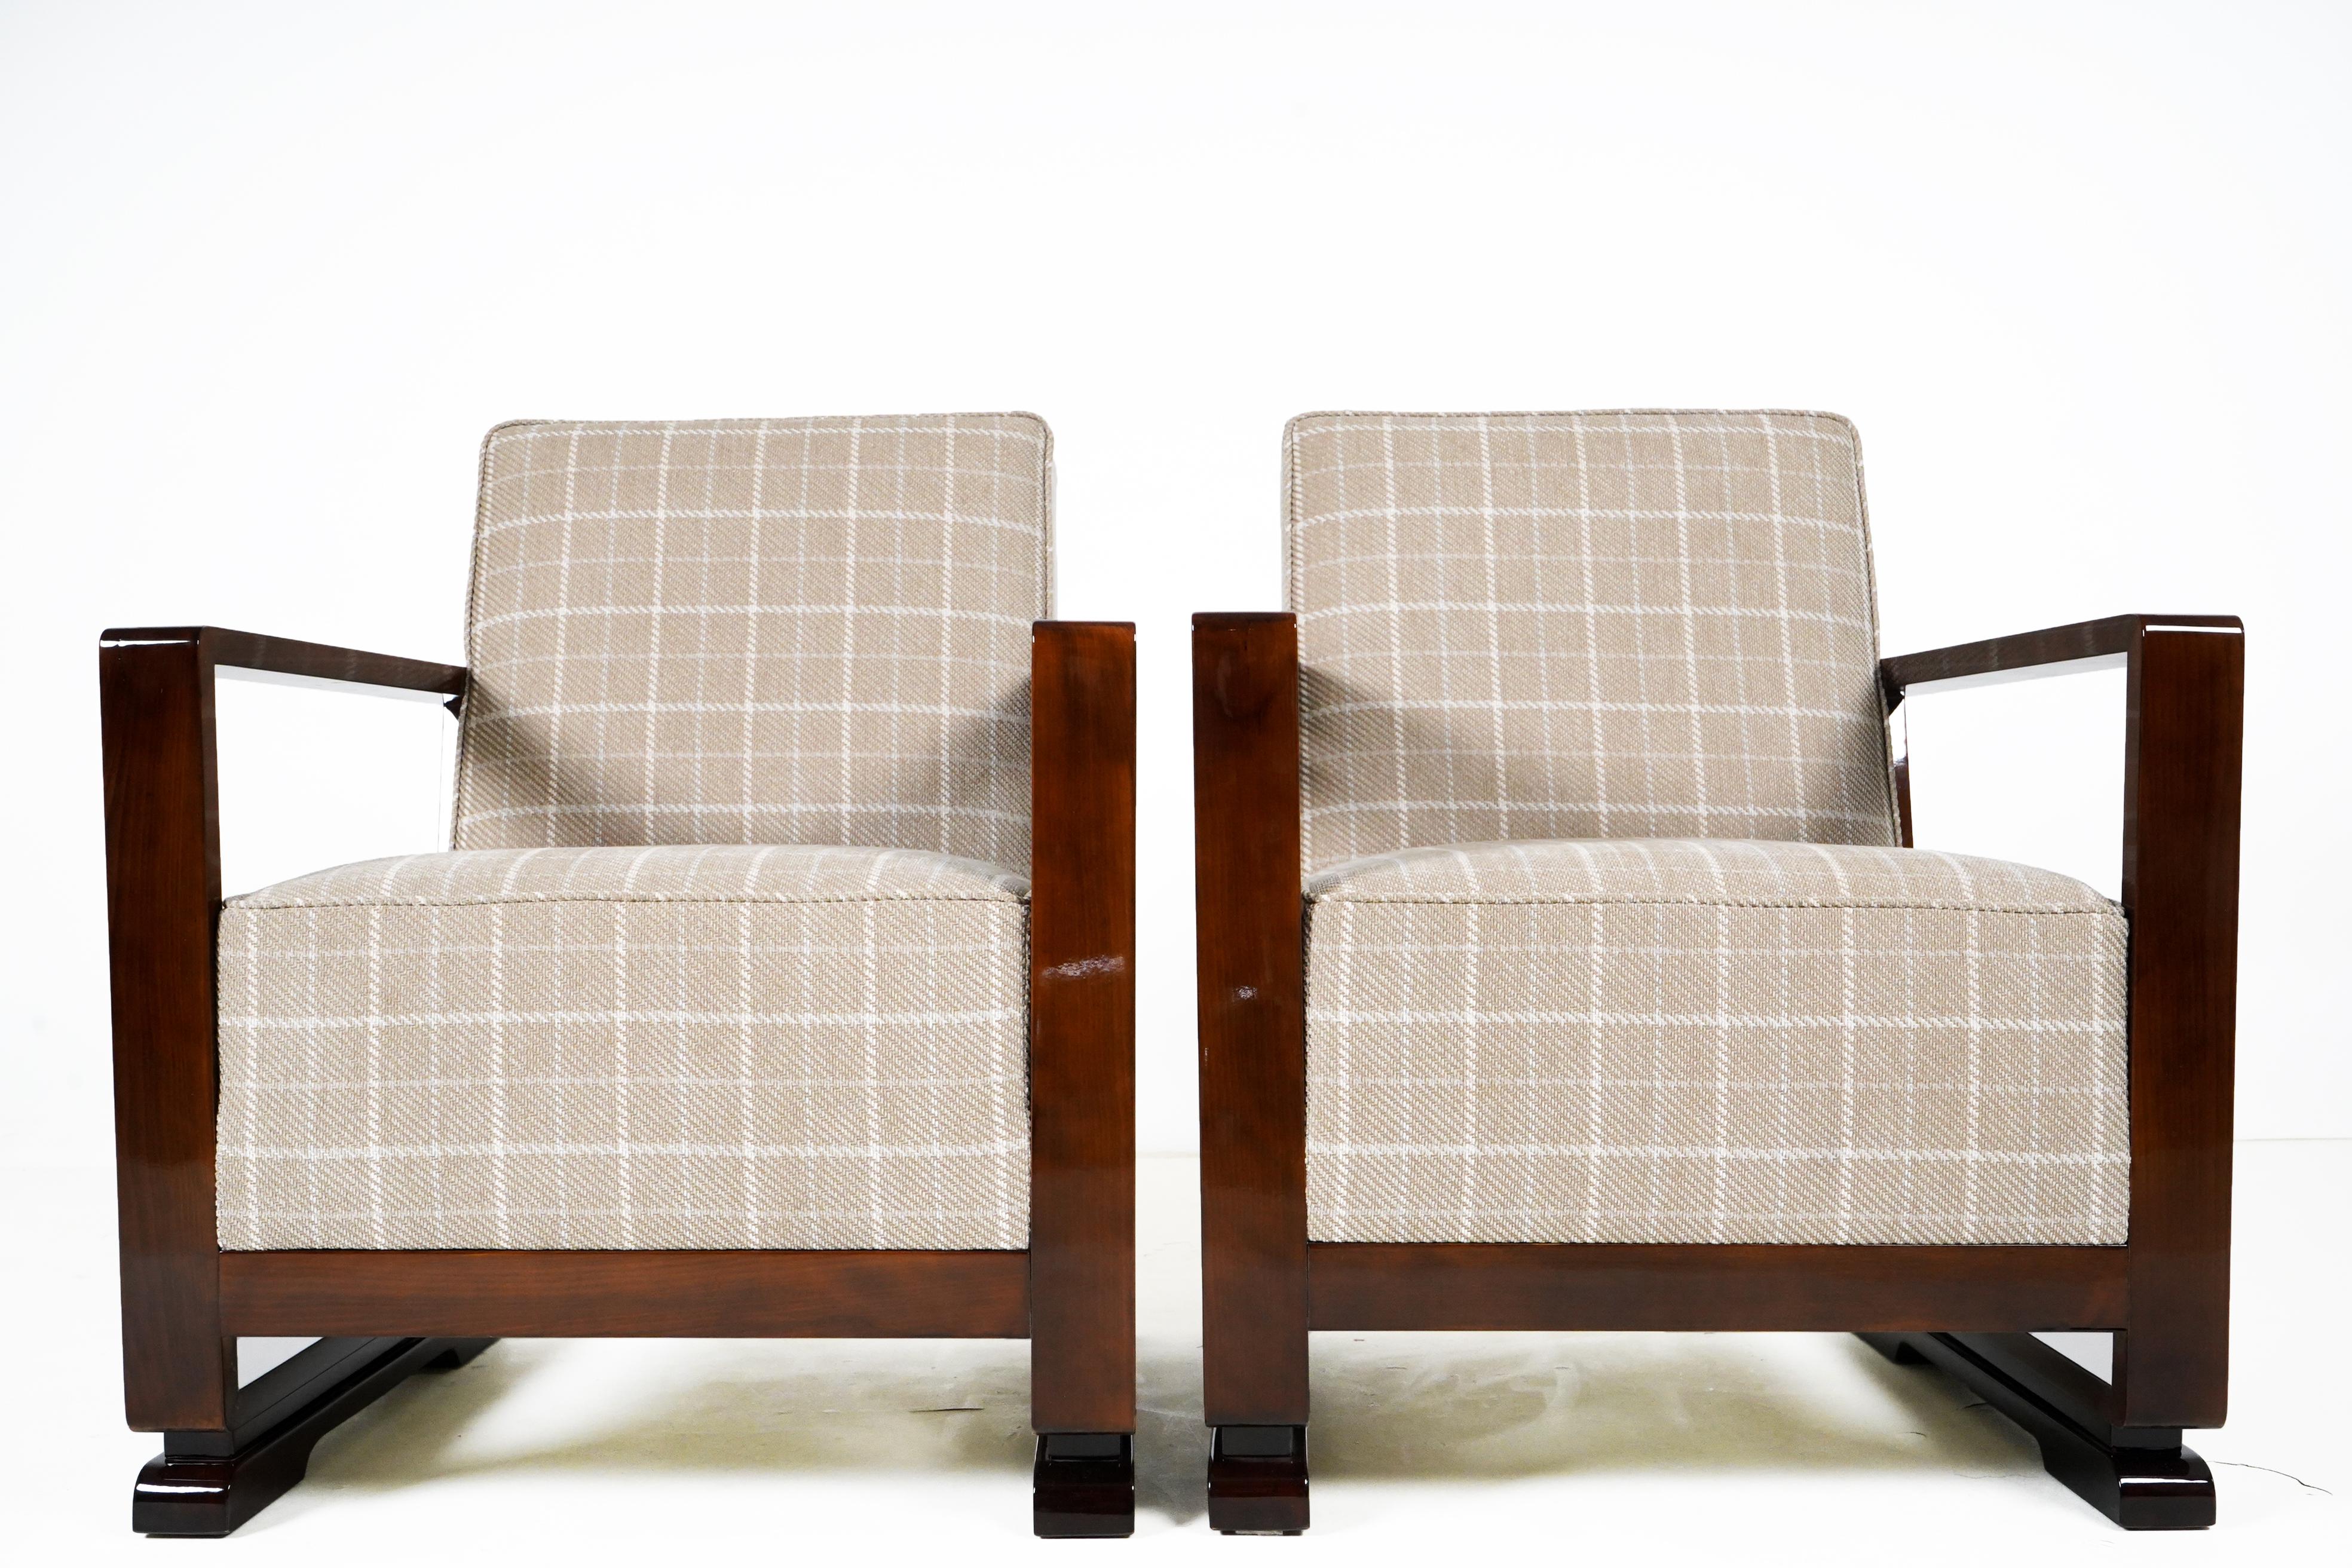 This pair of simple and starkly angular armchairs is loosely based on Art Deco originals. The arms are smoothly French-polished Hungarian walnut veneer. The upholstery is a contemporary plaid. The voluminous seats and backs provide ample cushioning